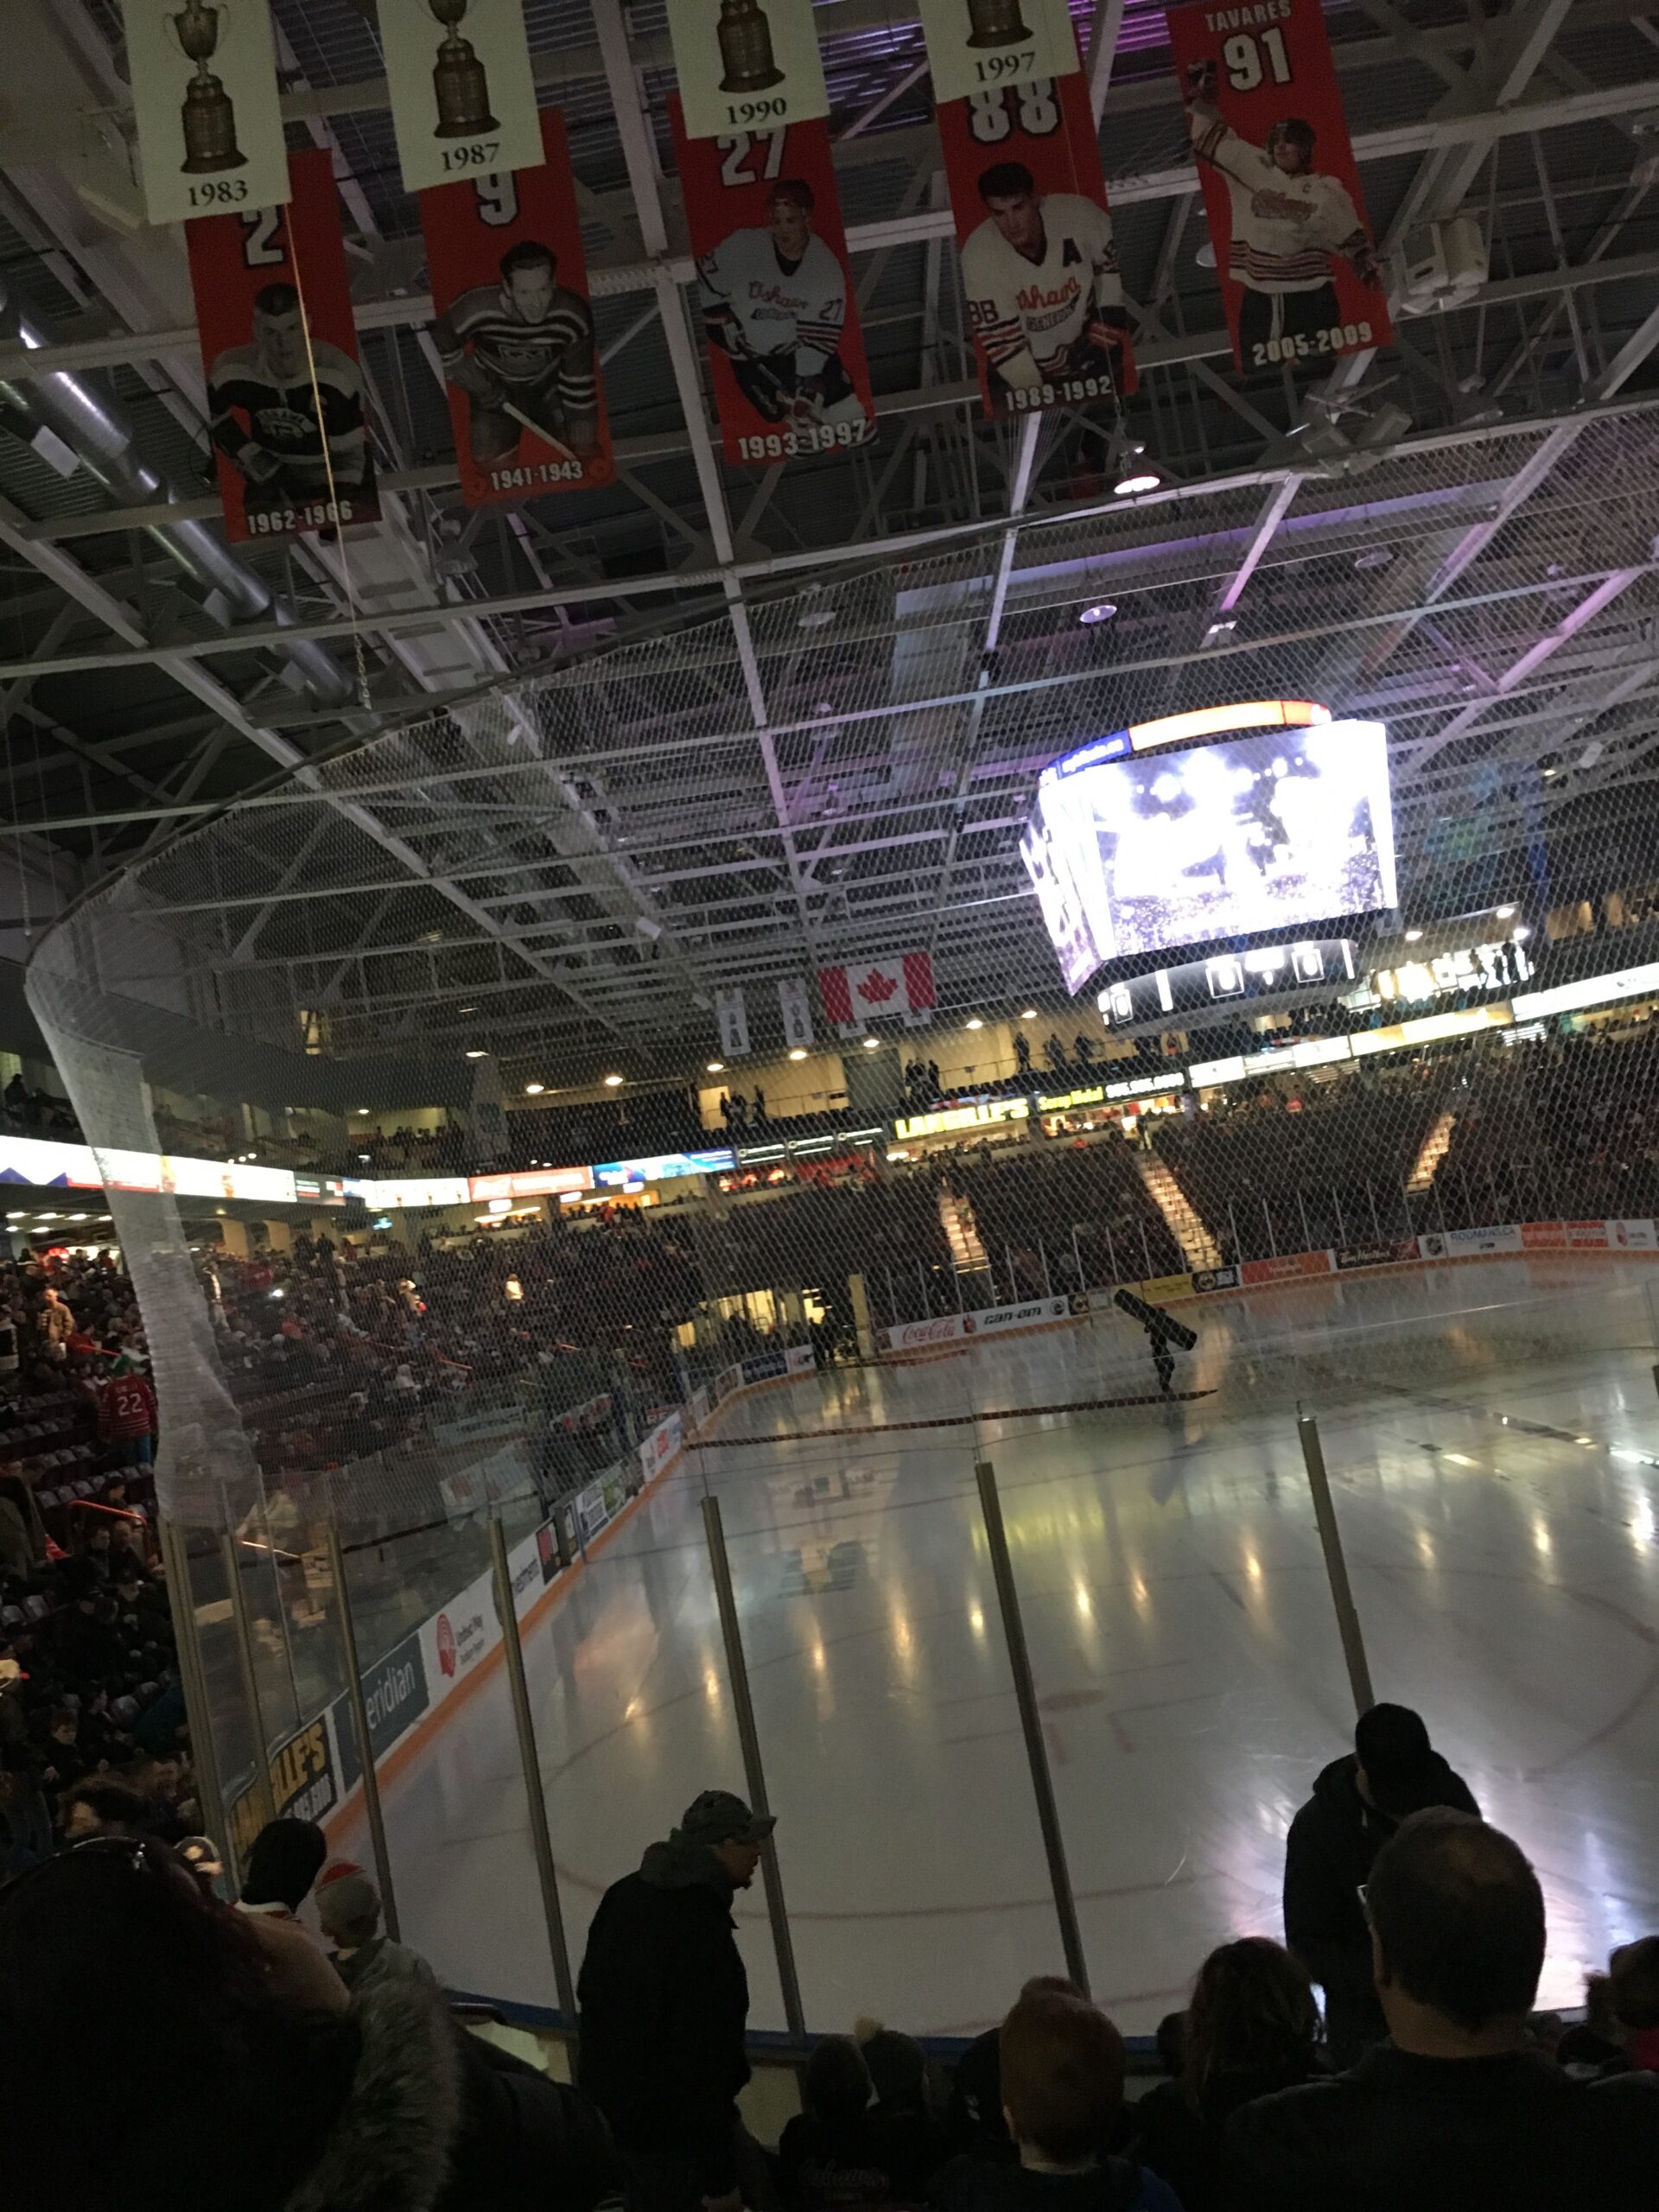 An empty rink, semi darkened, just before the Oshawa Generals play. Photo taken from one end of the rink, a couple rows up from ground level